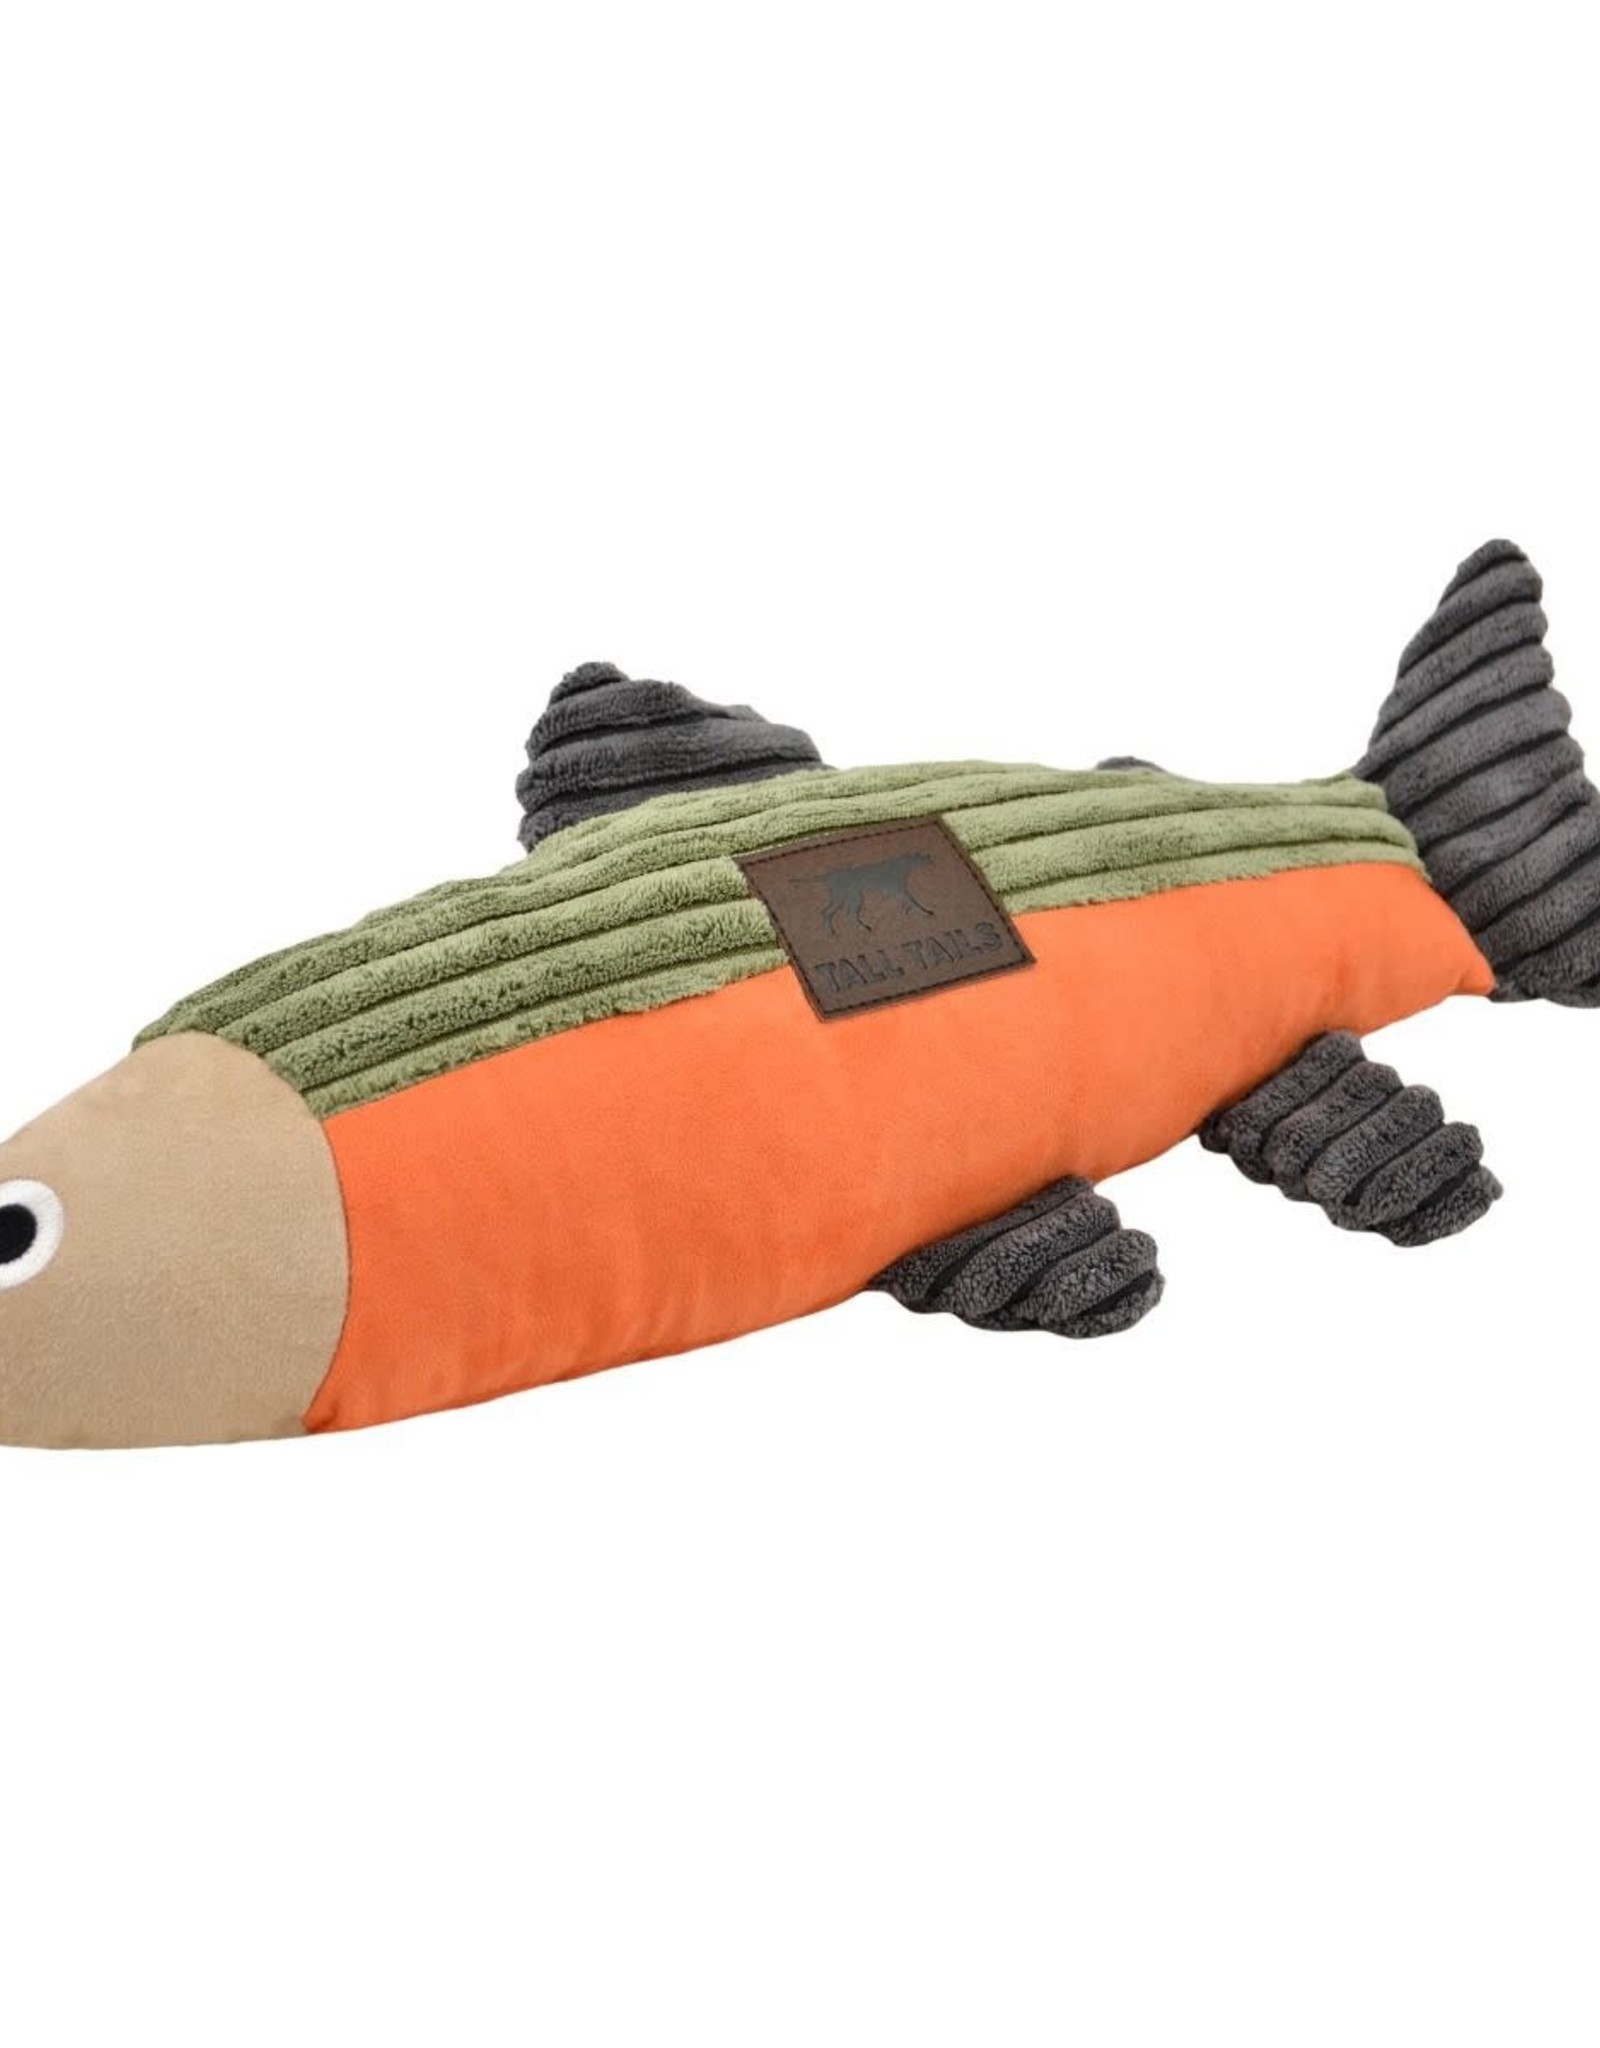 Tall Tails PLUSH FISH WITH SQUEAKER DOG-TOY - 12"